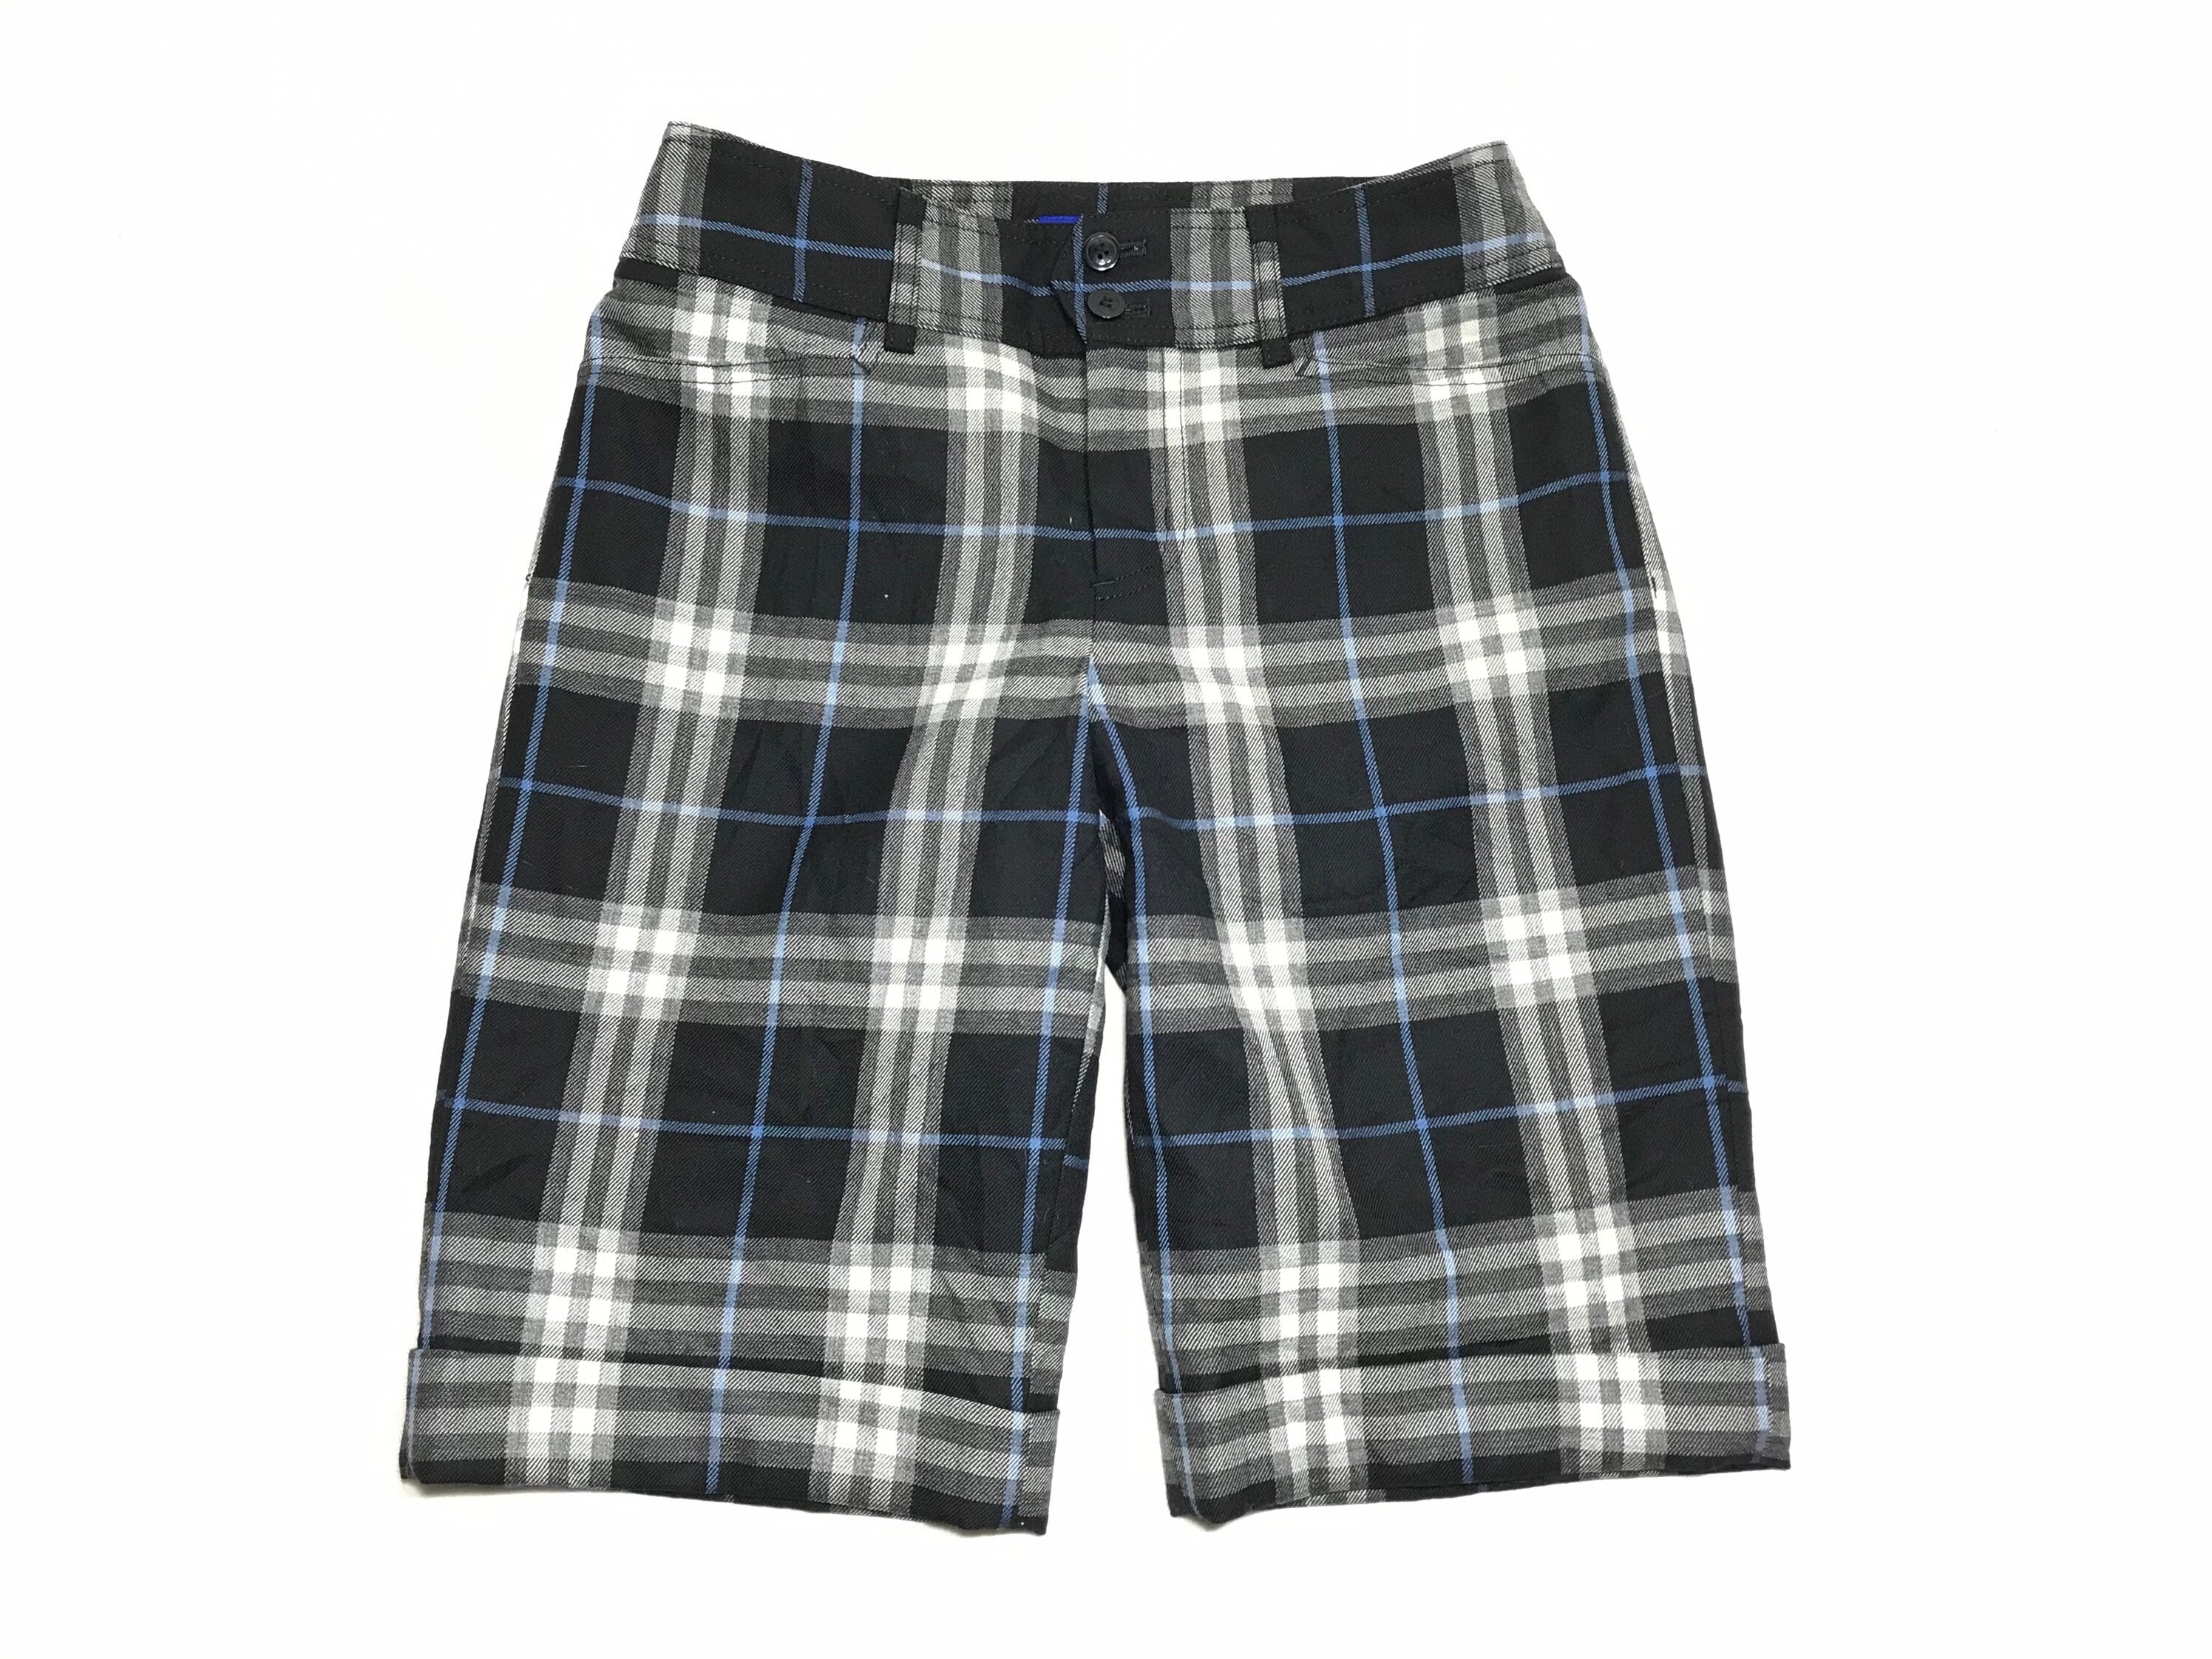 Outrageous Golf Knickers Outfit Burberry Plaid